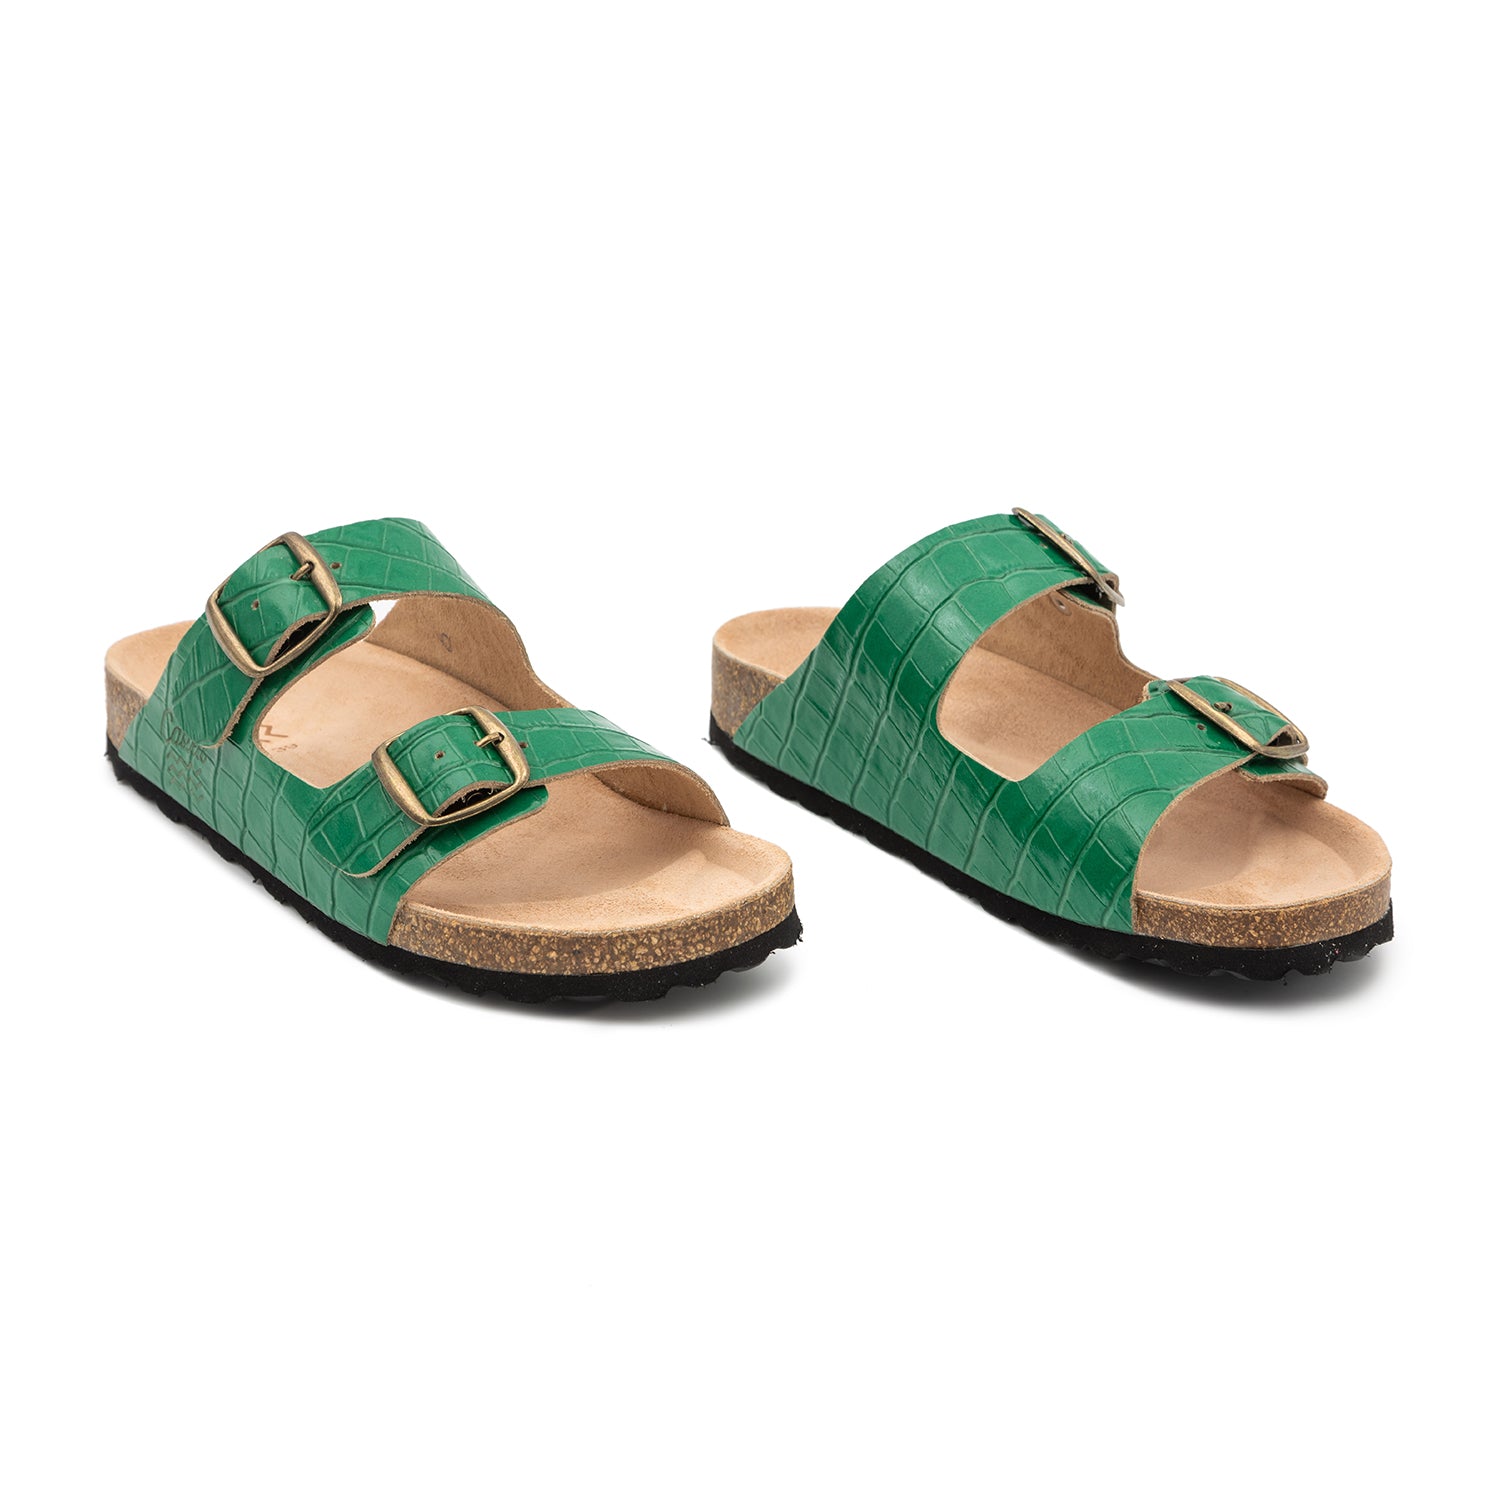 Plain Leather Sandal With Open Toe For Women - 1727 M Greco Tarvos